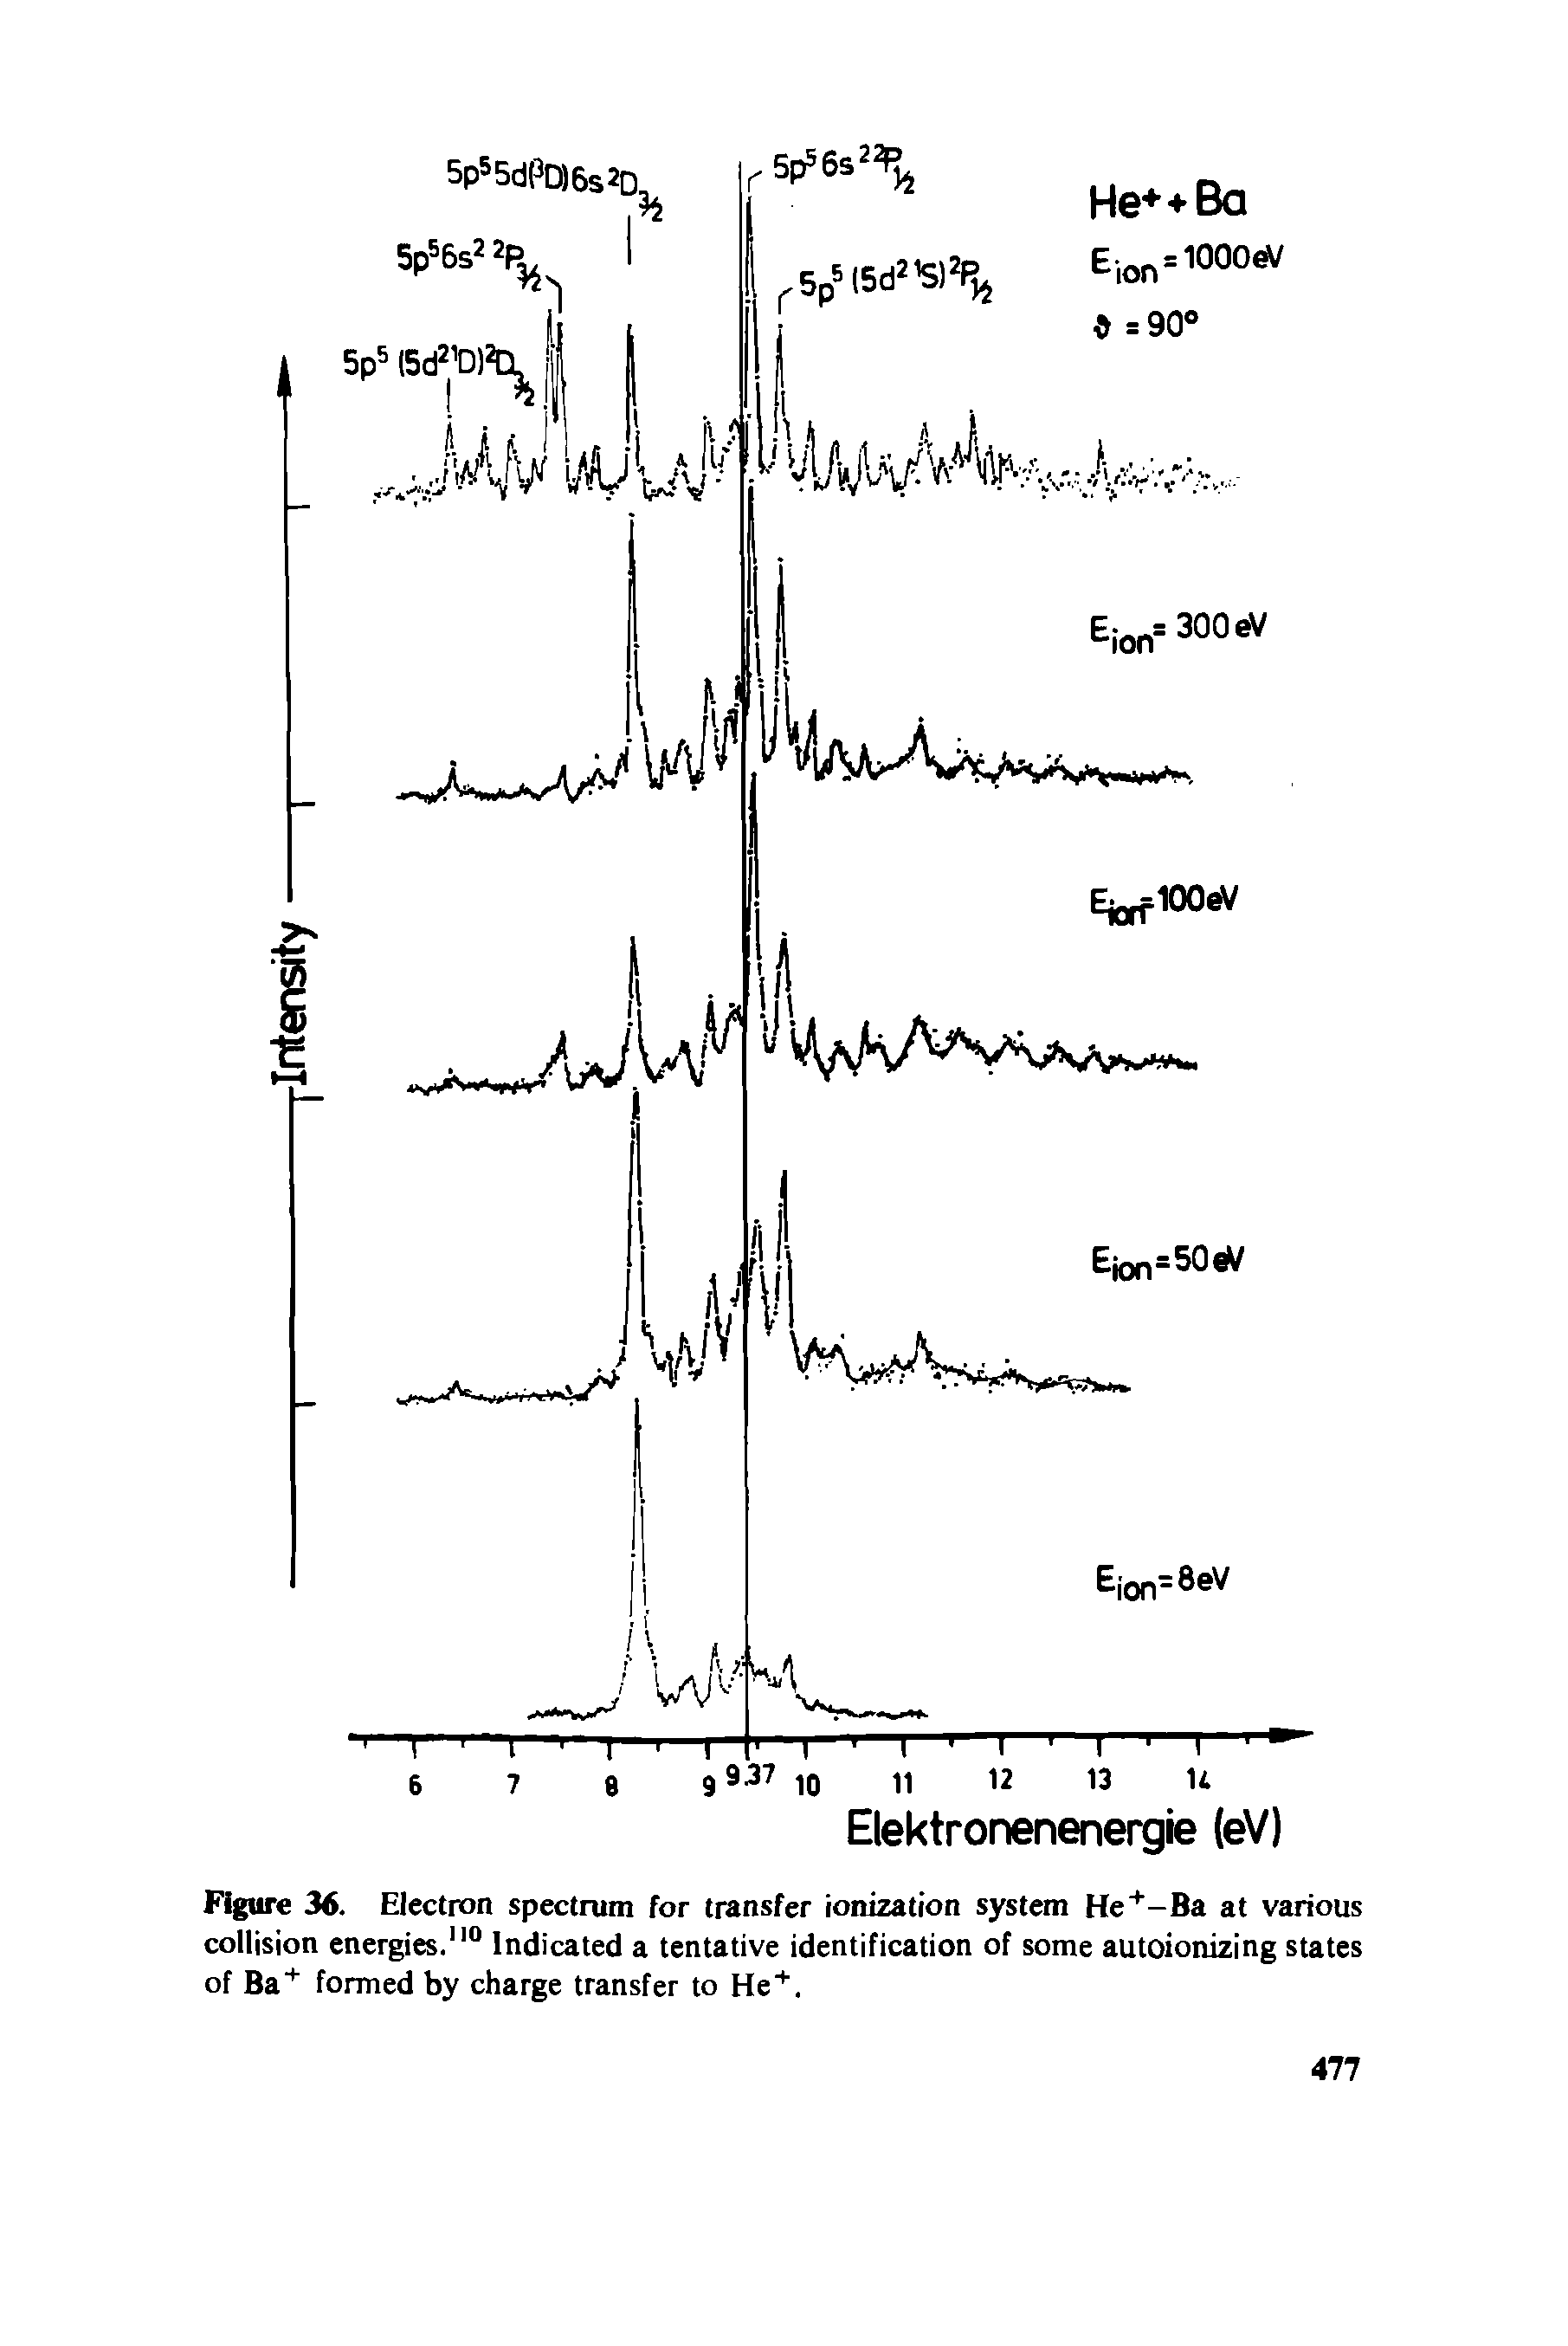 Figure 36. Electron spectrum for transfer ionization system He+-Ba at various collision energies.110 Indicated a tentative identification of some autoionizing states of Ba+ formed by charge transfer to He+.